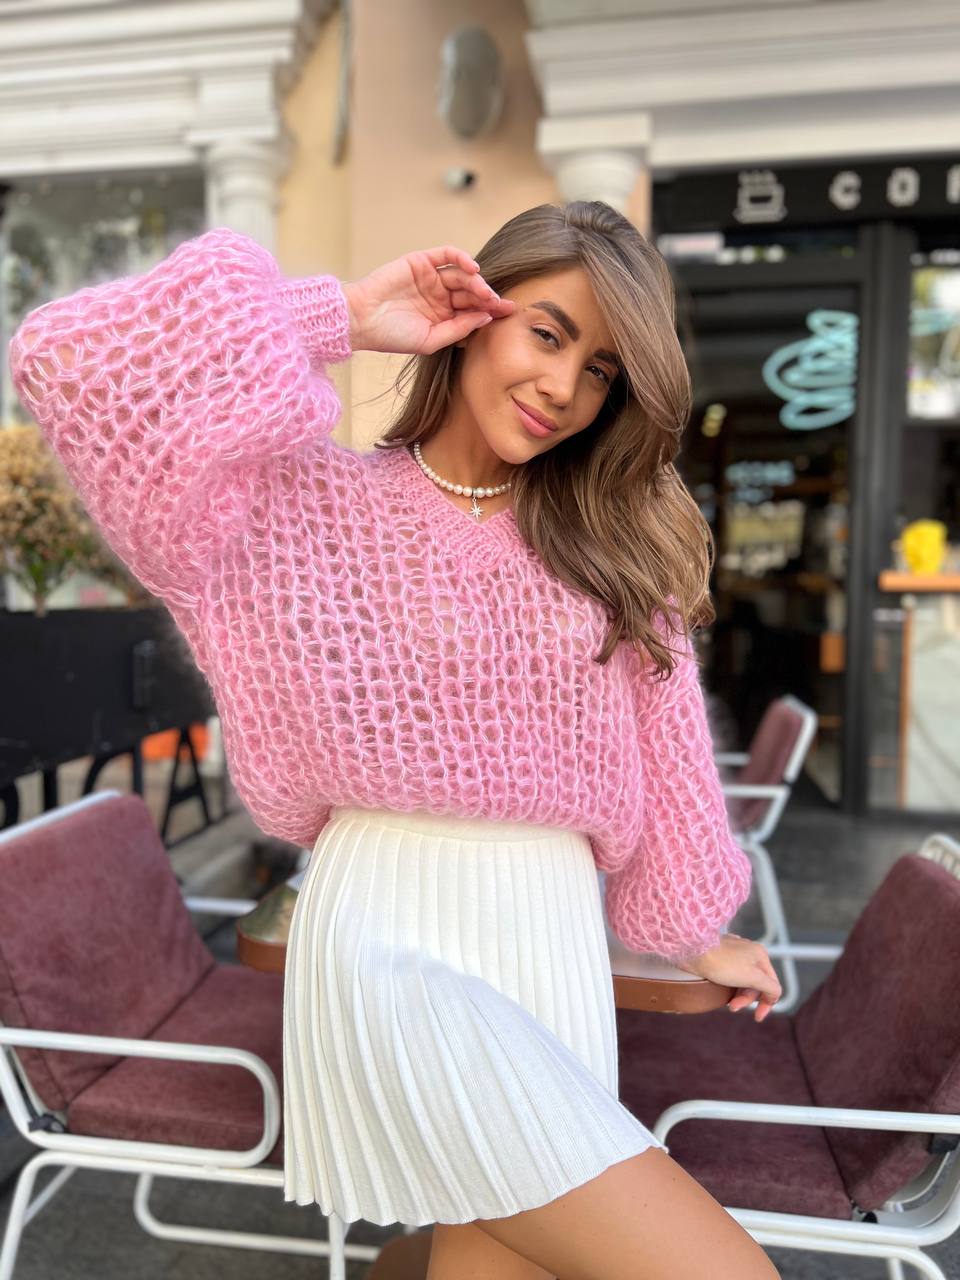 Oversized knitted sweater, Chunky Knit Sweater, Woman Hand Knit sweater, Winter Pullover Sweater, Warm Loose handmade Sweater